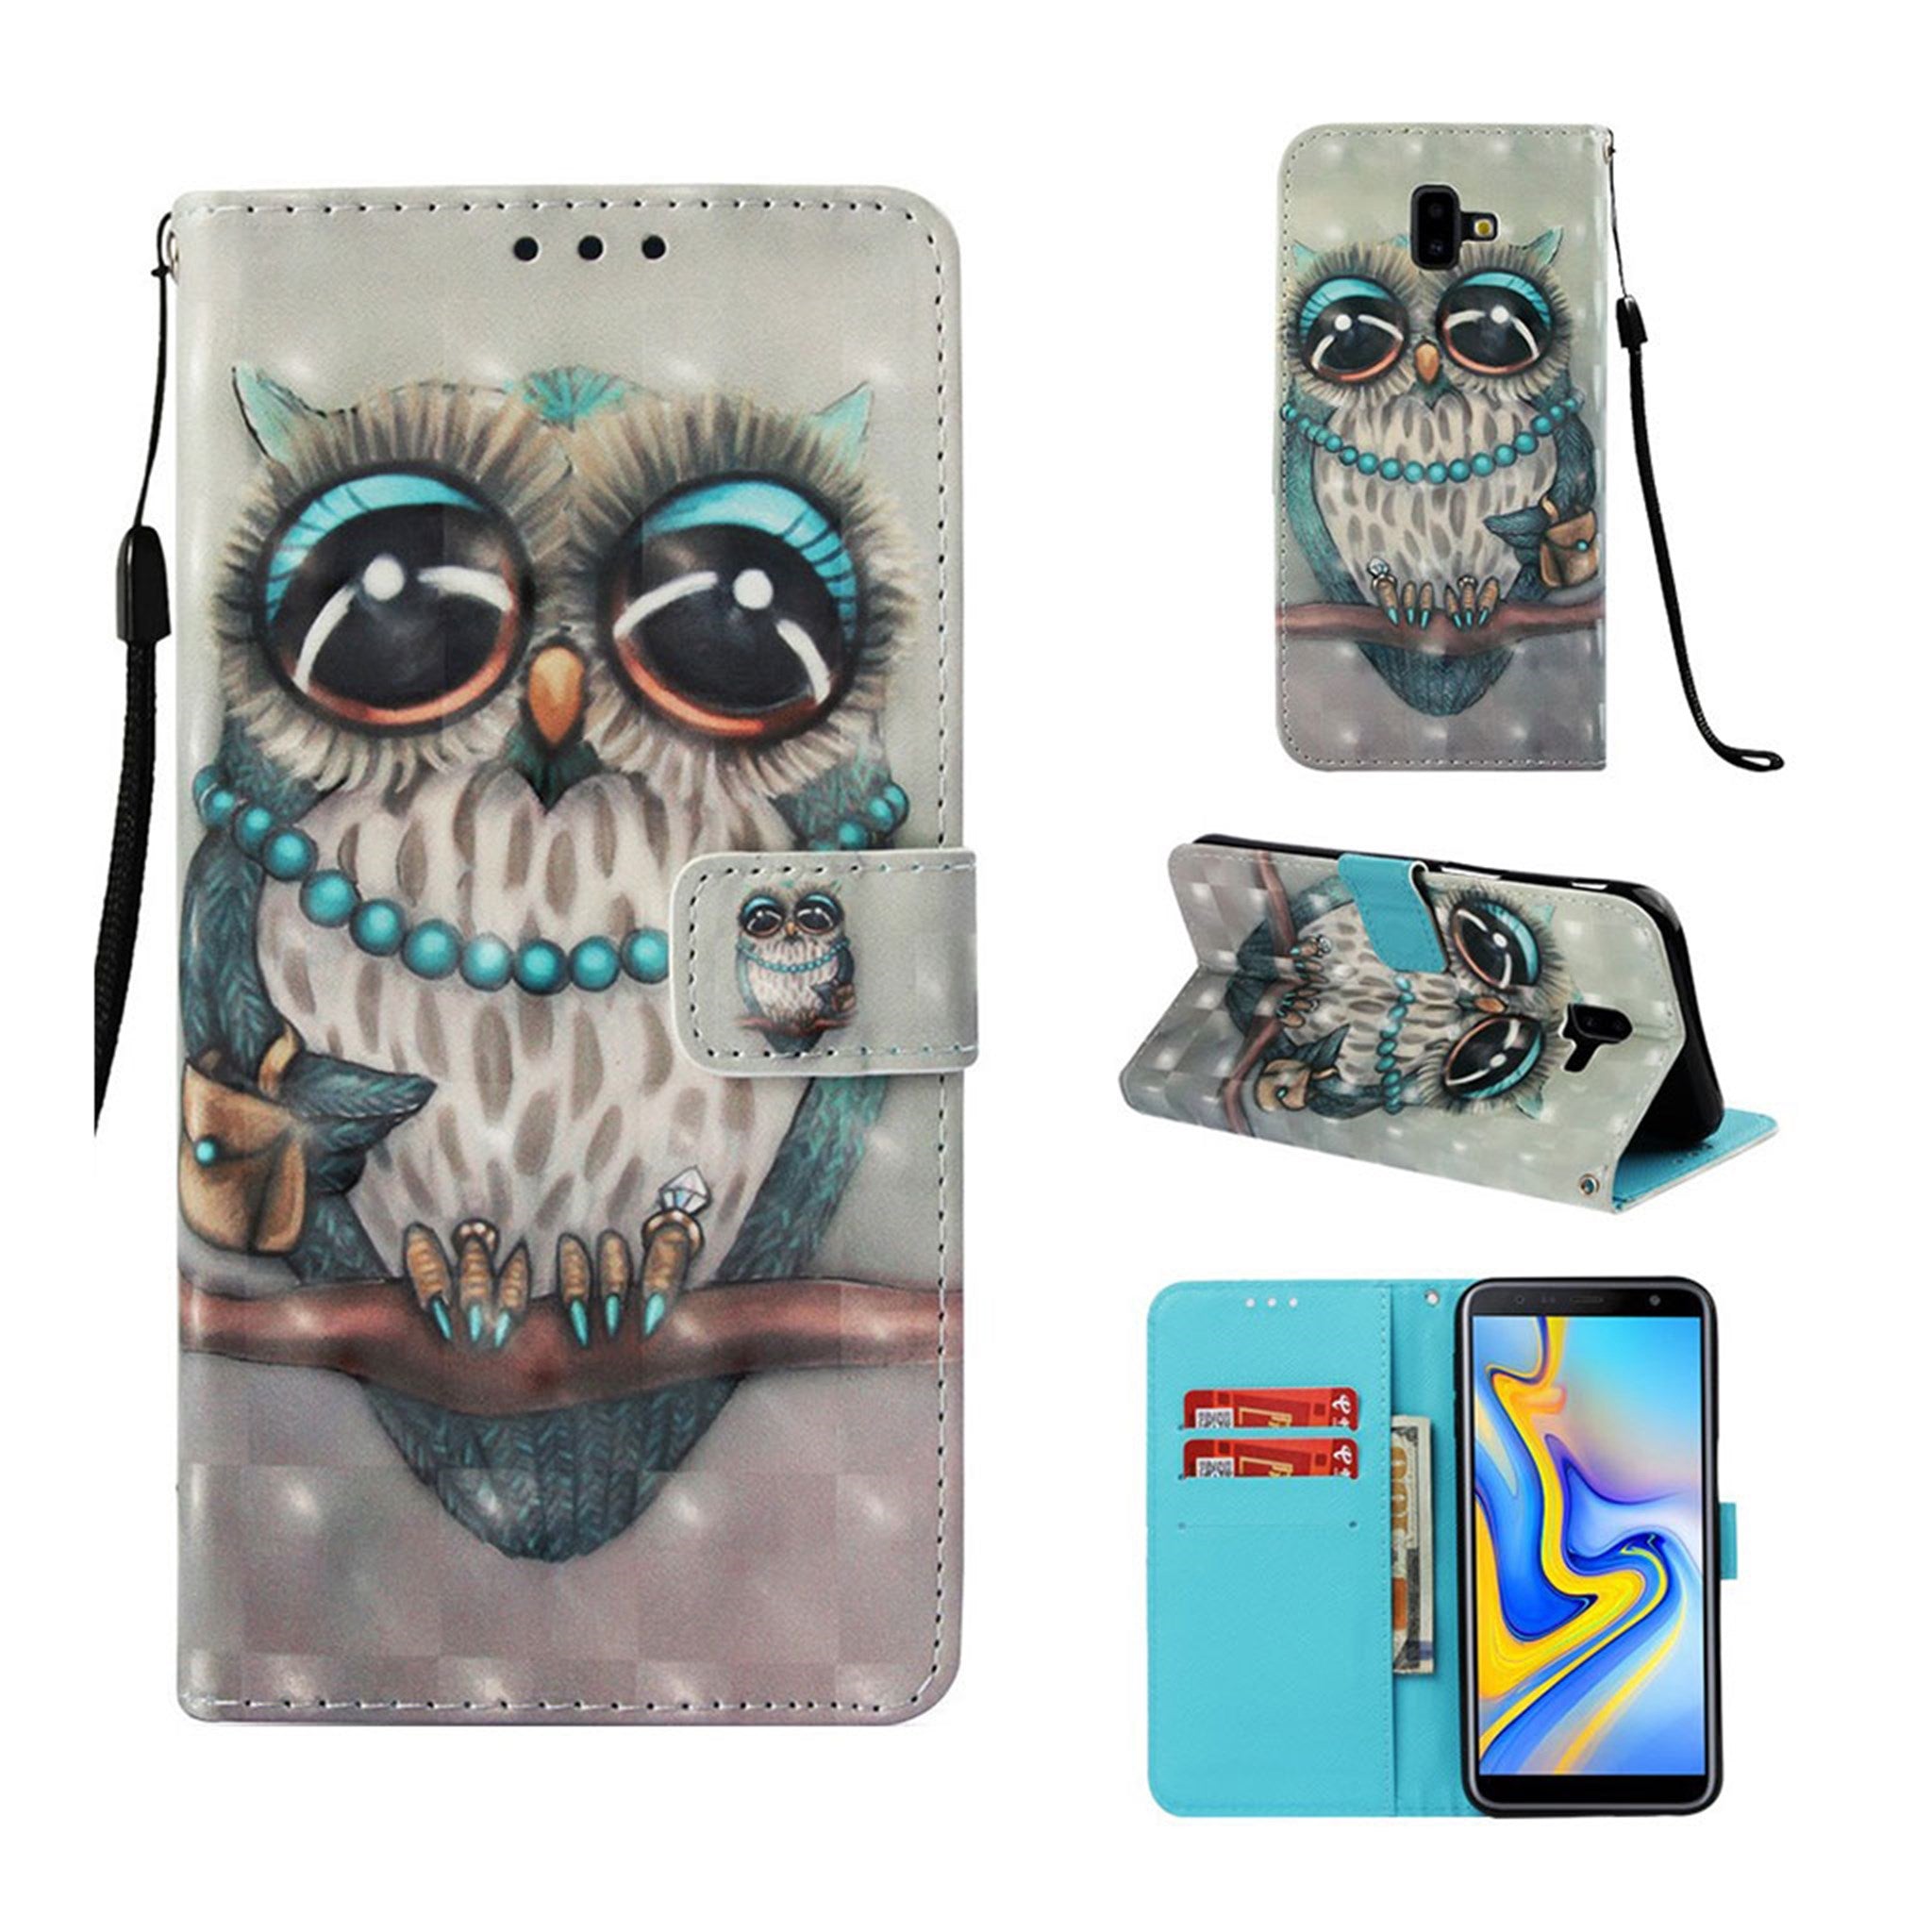 Samsung Galaxy J6 Plus (2018) patterned leather flip case - Owl Standing on the Branch